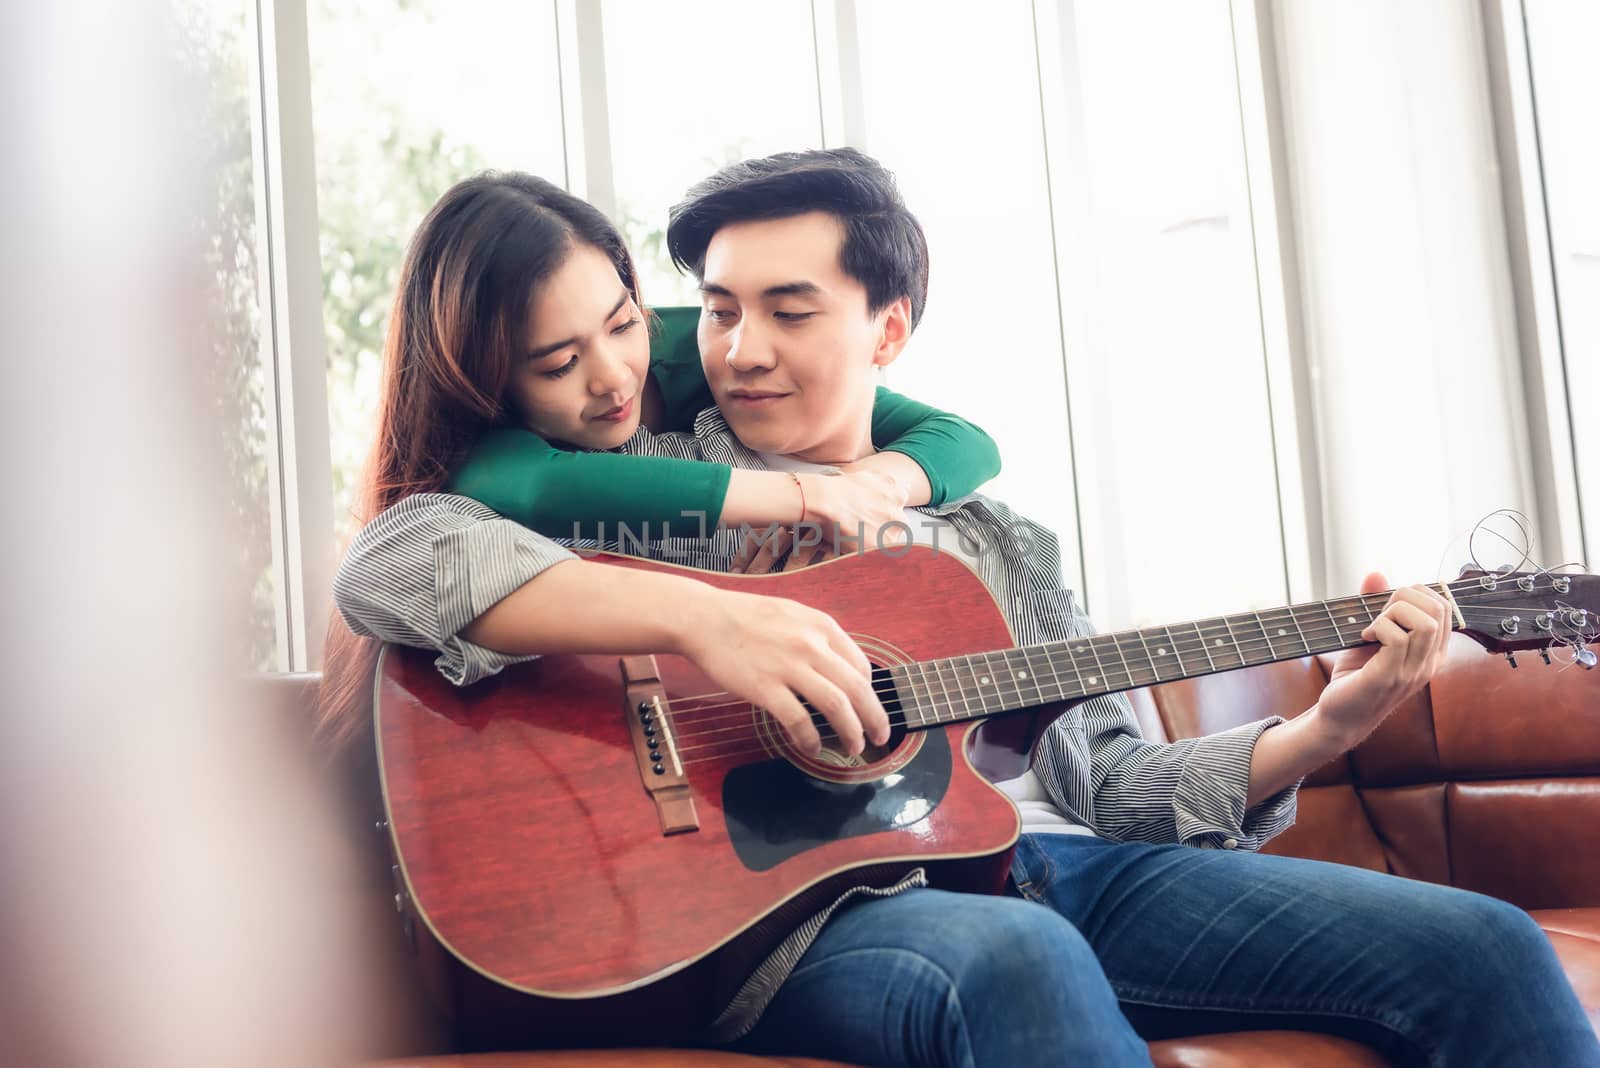 Young Couple Love Having Fun While Sing a Song and Playing Guitar in Living Room Together, Portrait of Couple are Relaxing at Their Home. Romantic Lifestyles an Valentine's Day Concept by MahaHeang245789